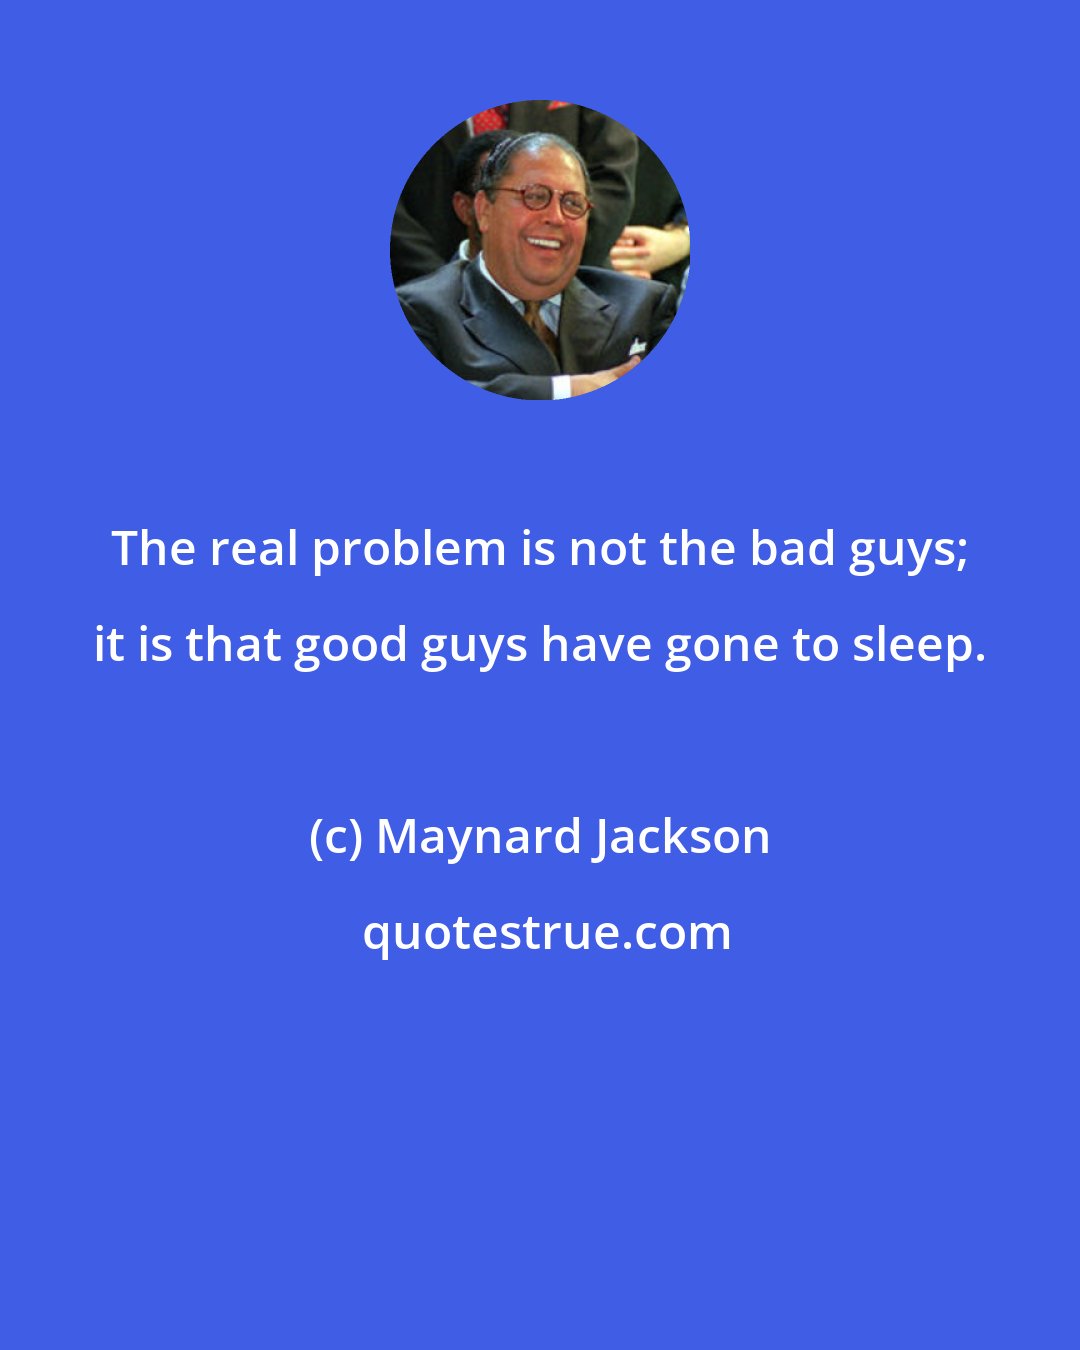 Maynard Jackson: The real problem is not the bad guys; it is that good guys have gone to sleep.